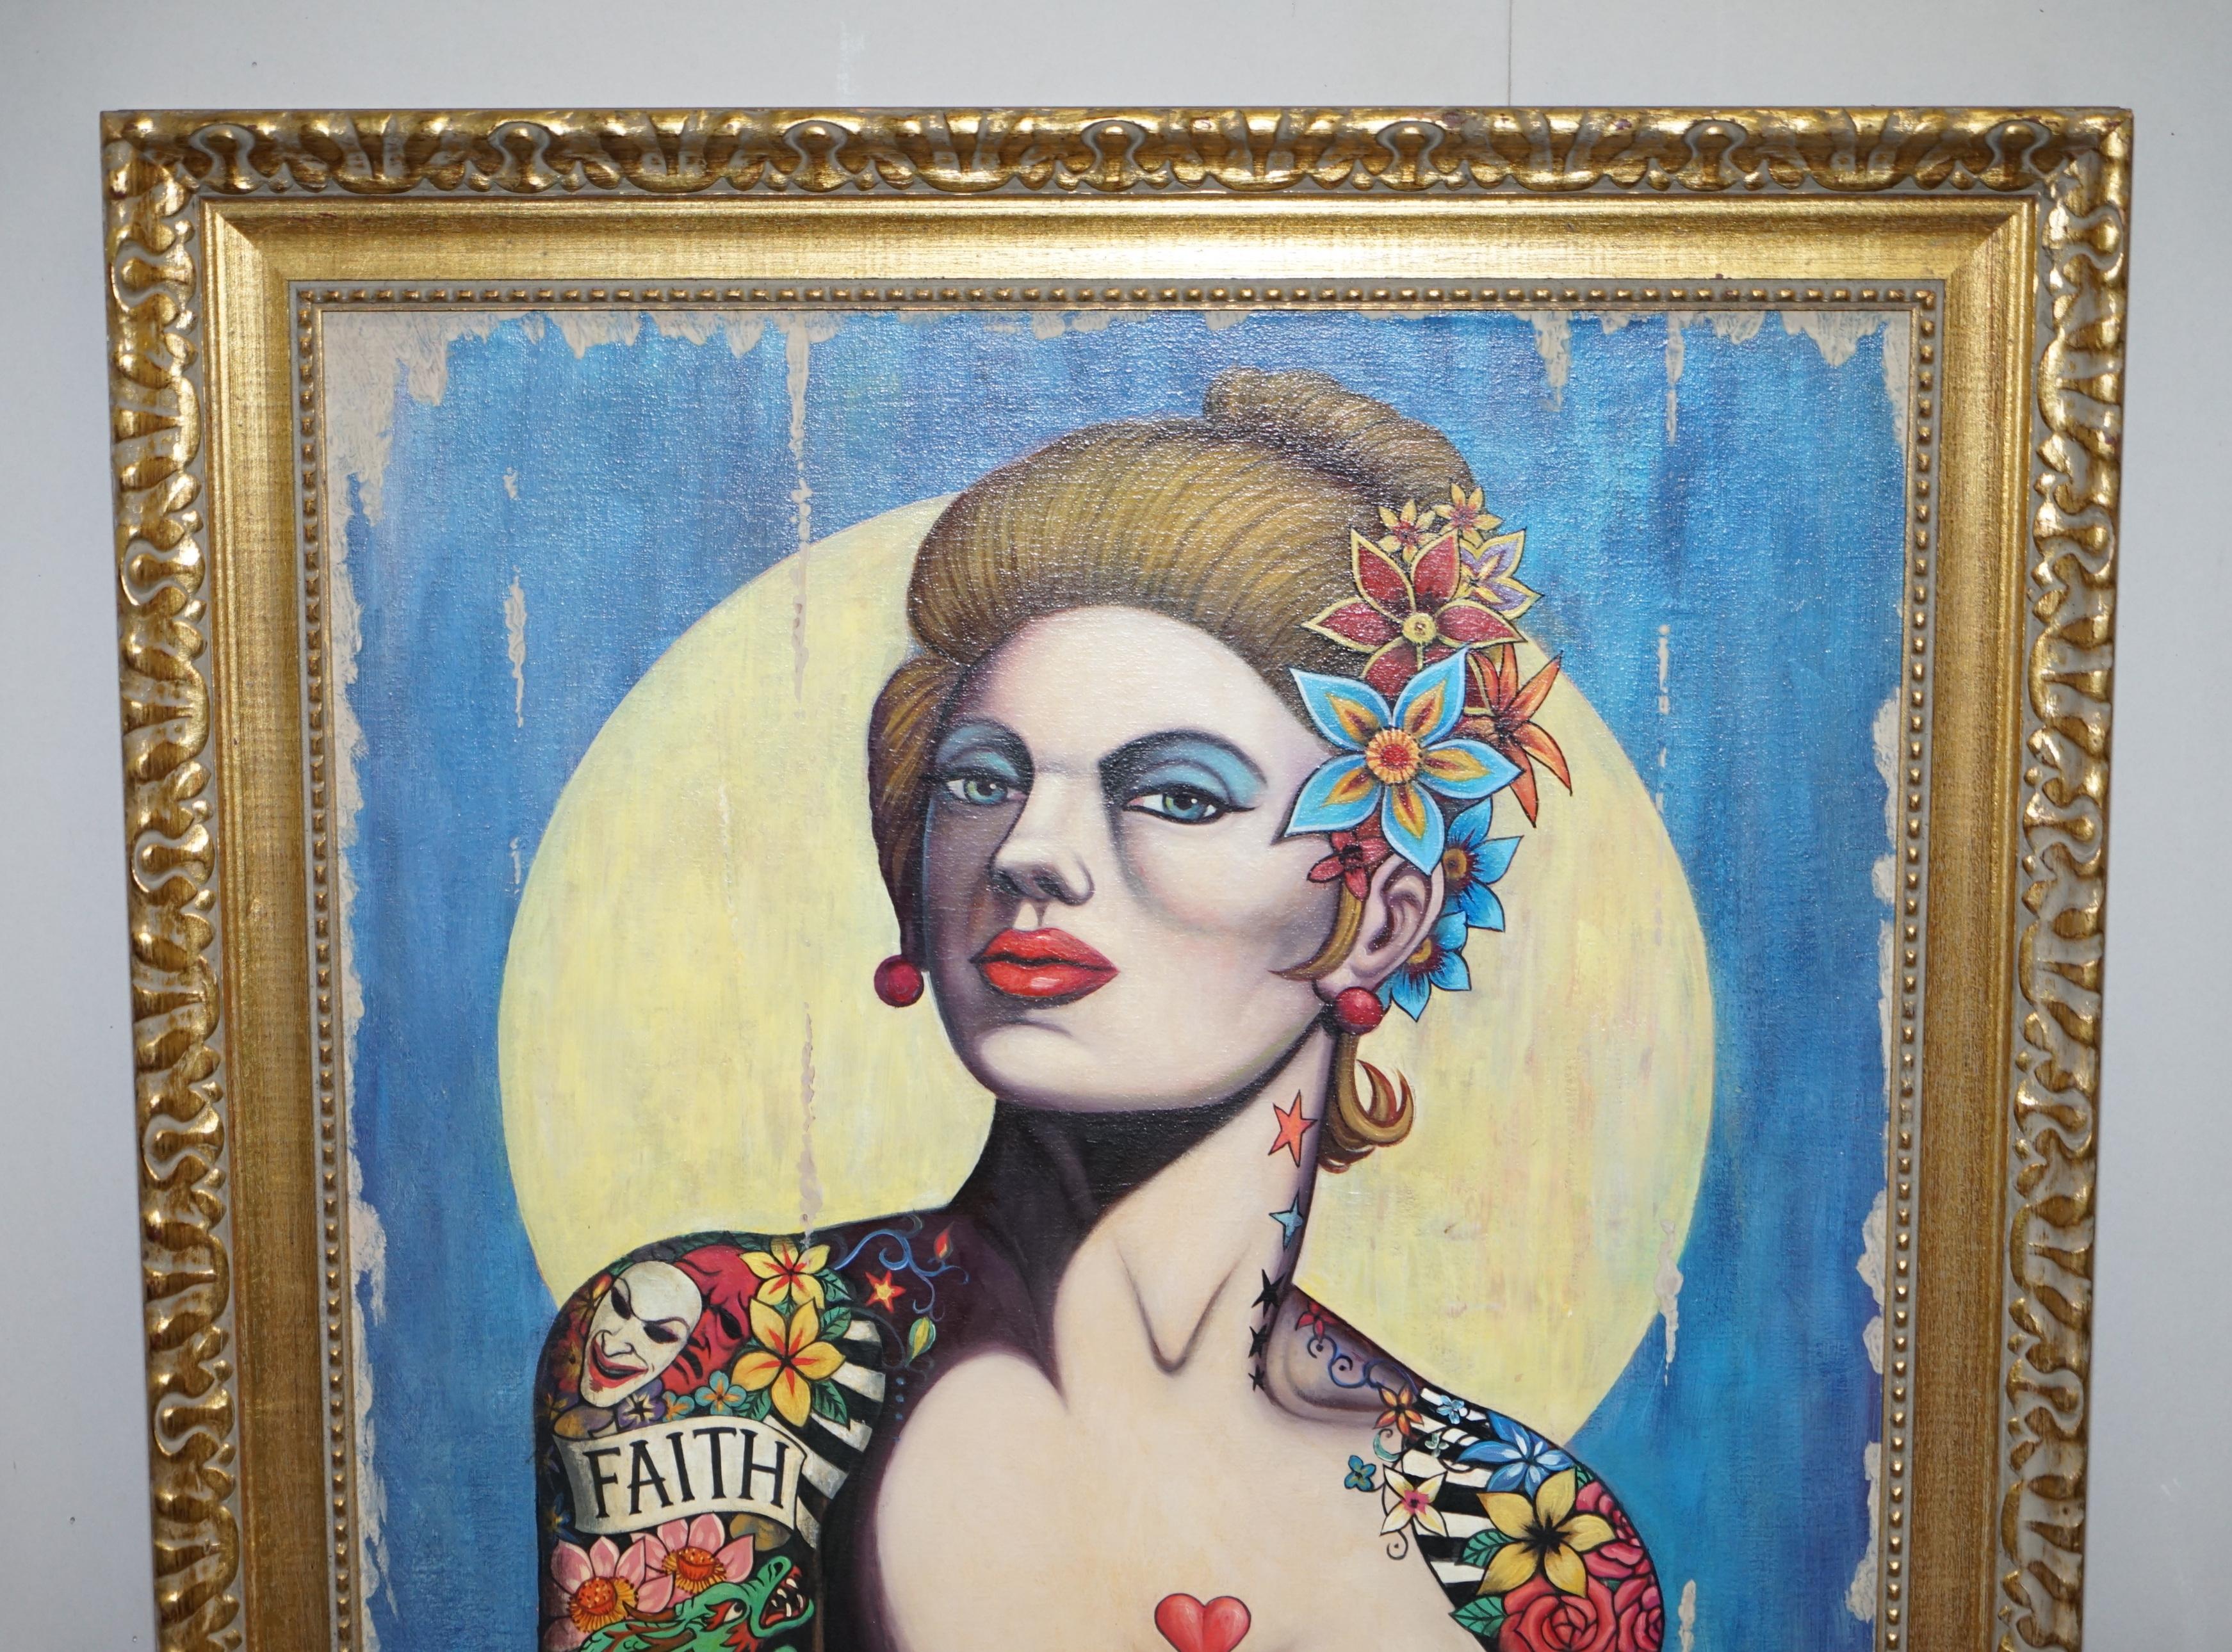 English Sublime David Hall Oil on Boarding Painting of a Very Cool Heavily Tattooed Chic